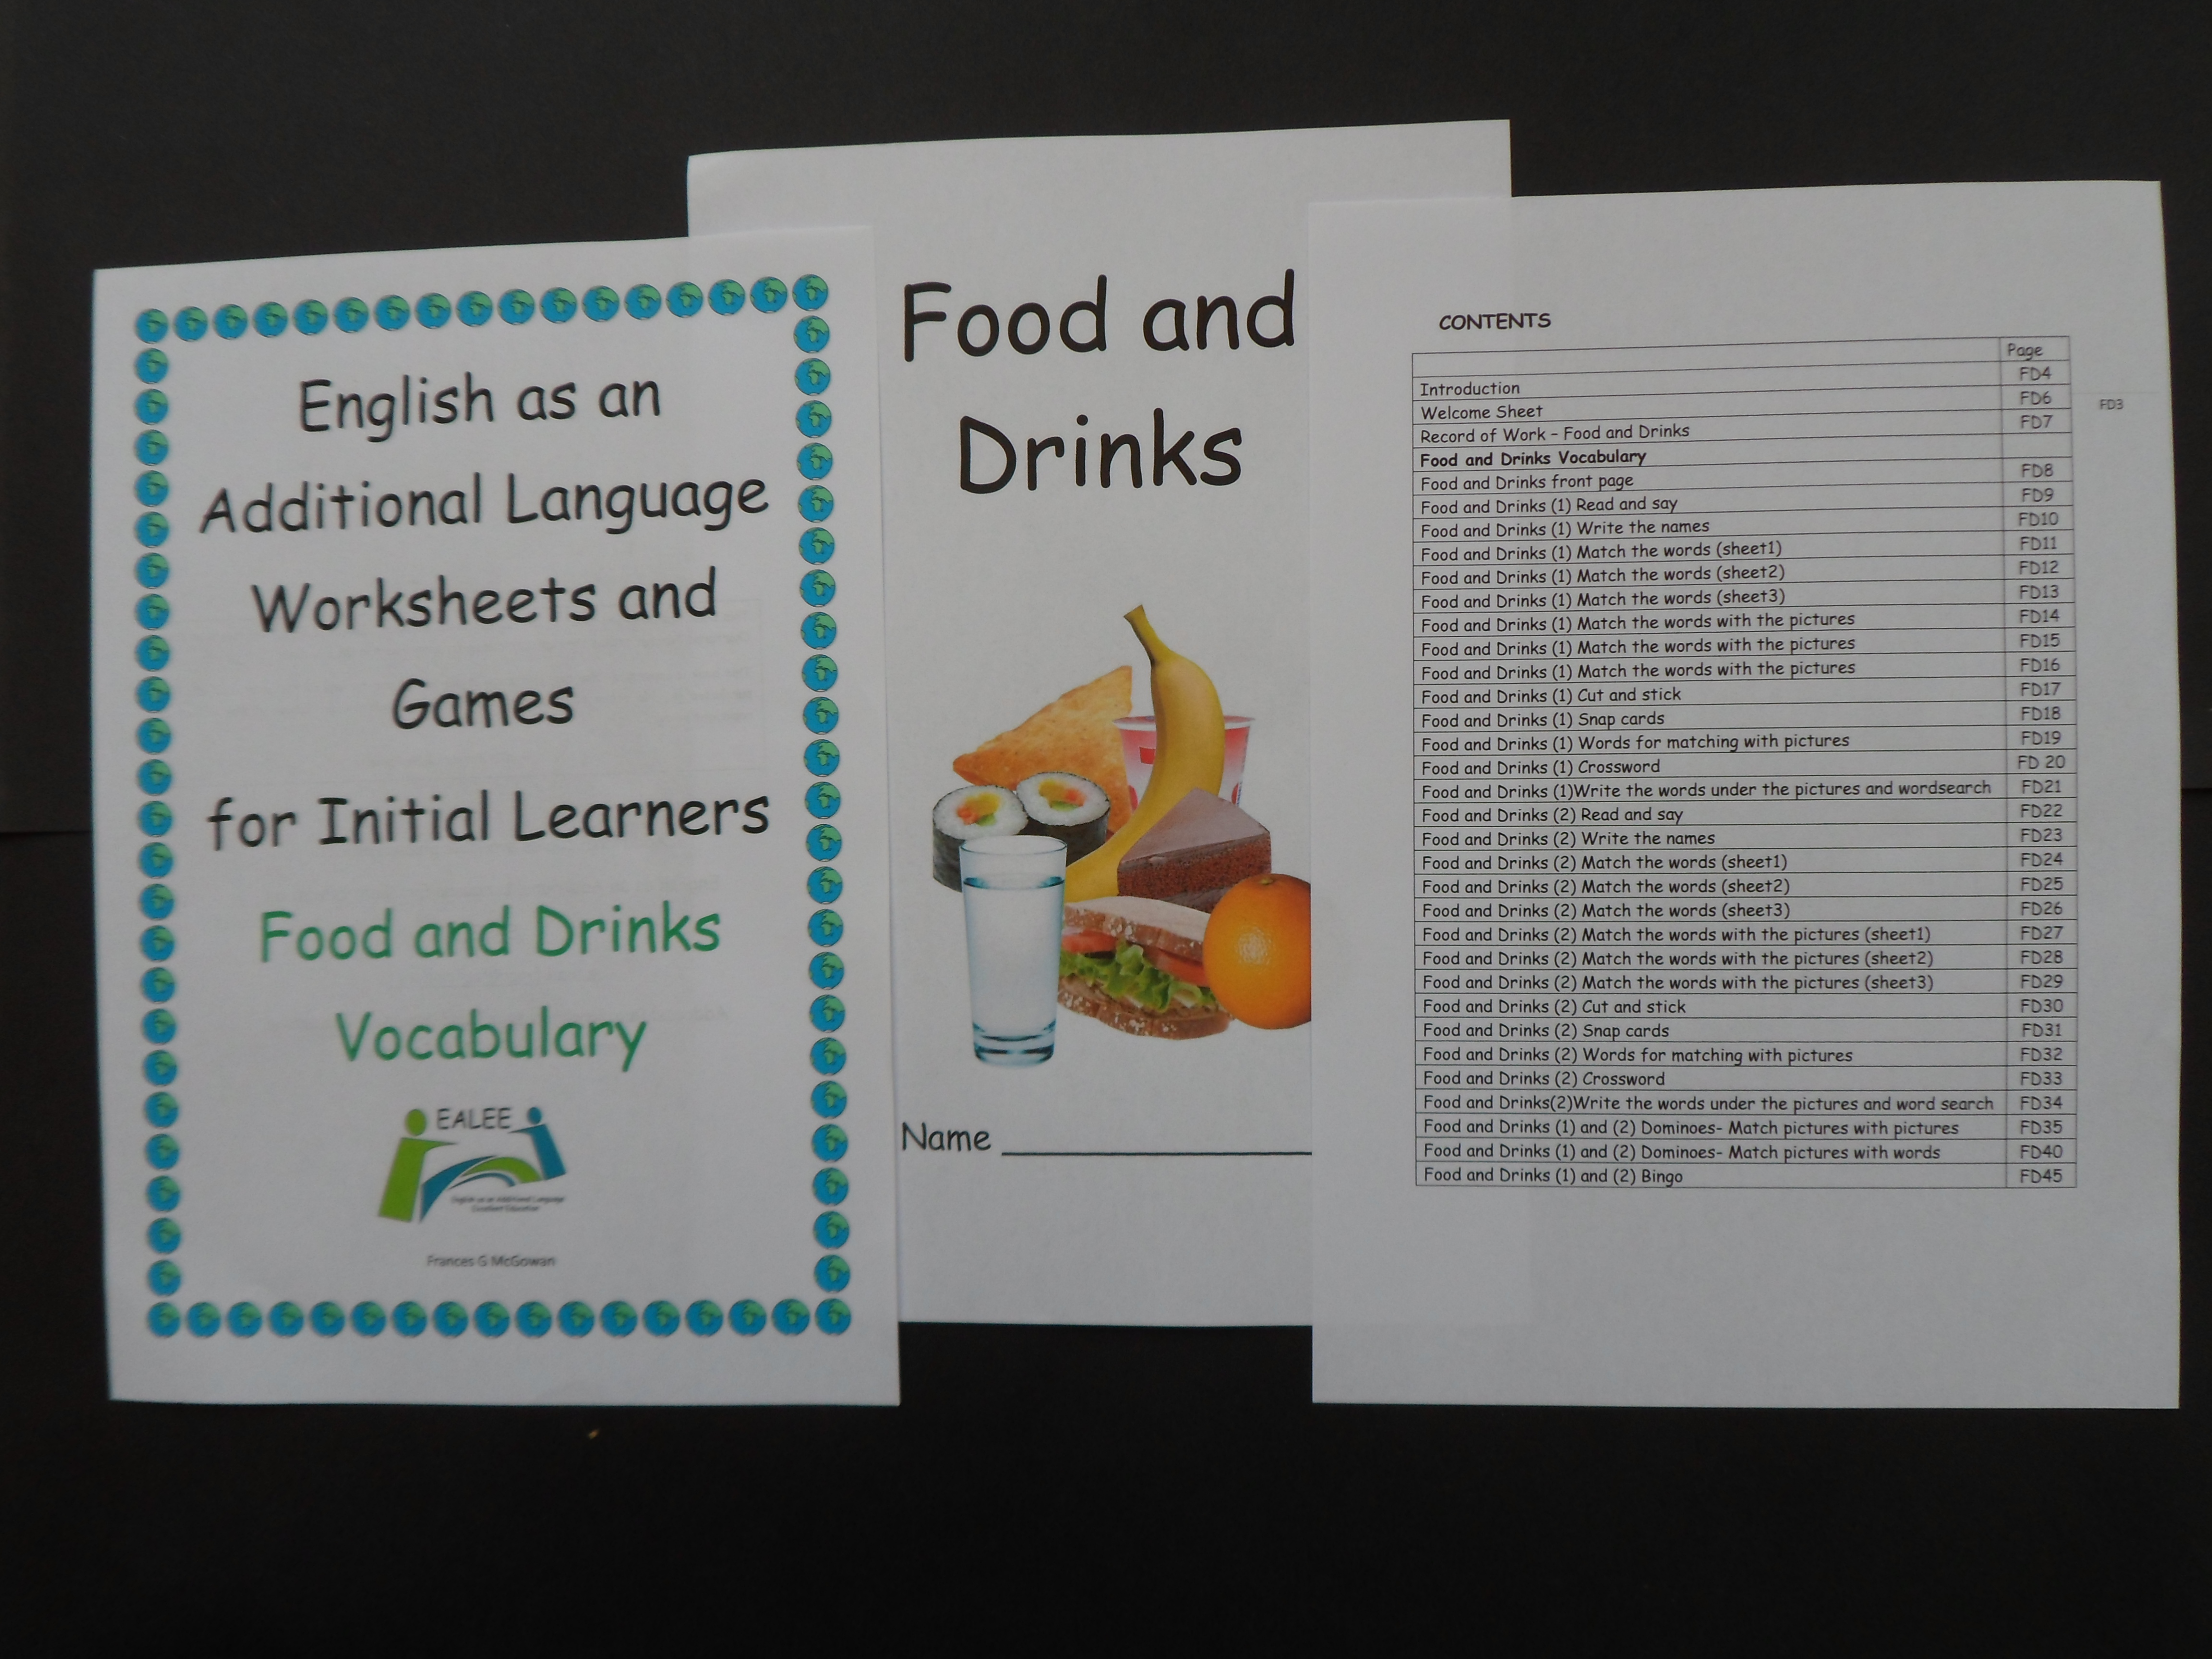 EAL/ESL Worksheets and Games for Initial Learners Food and Drinks Vocabulary